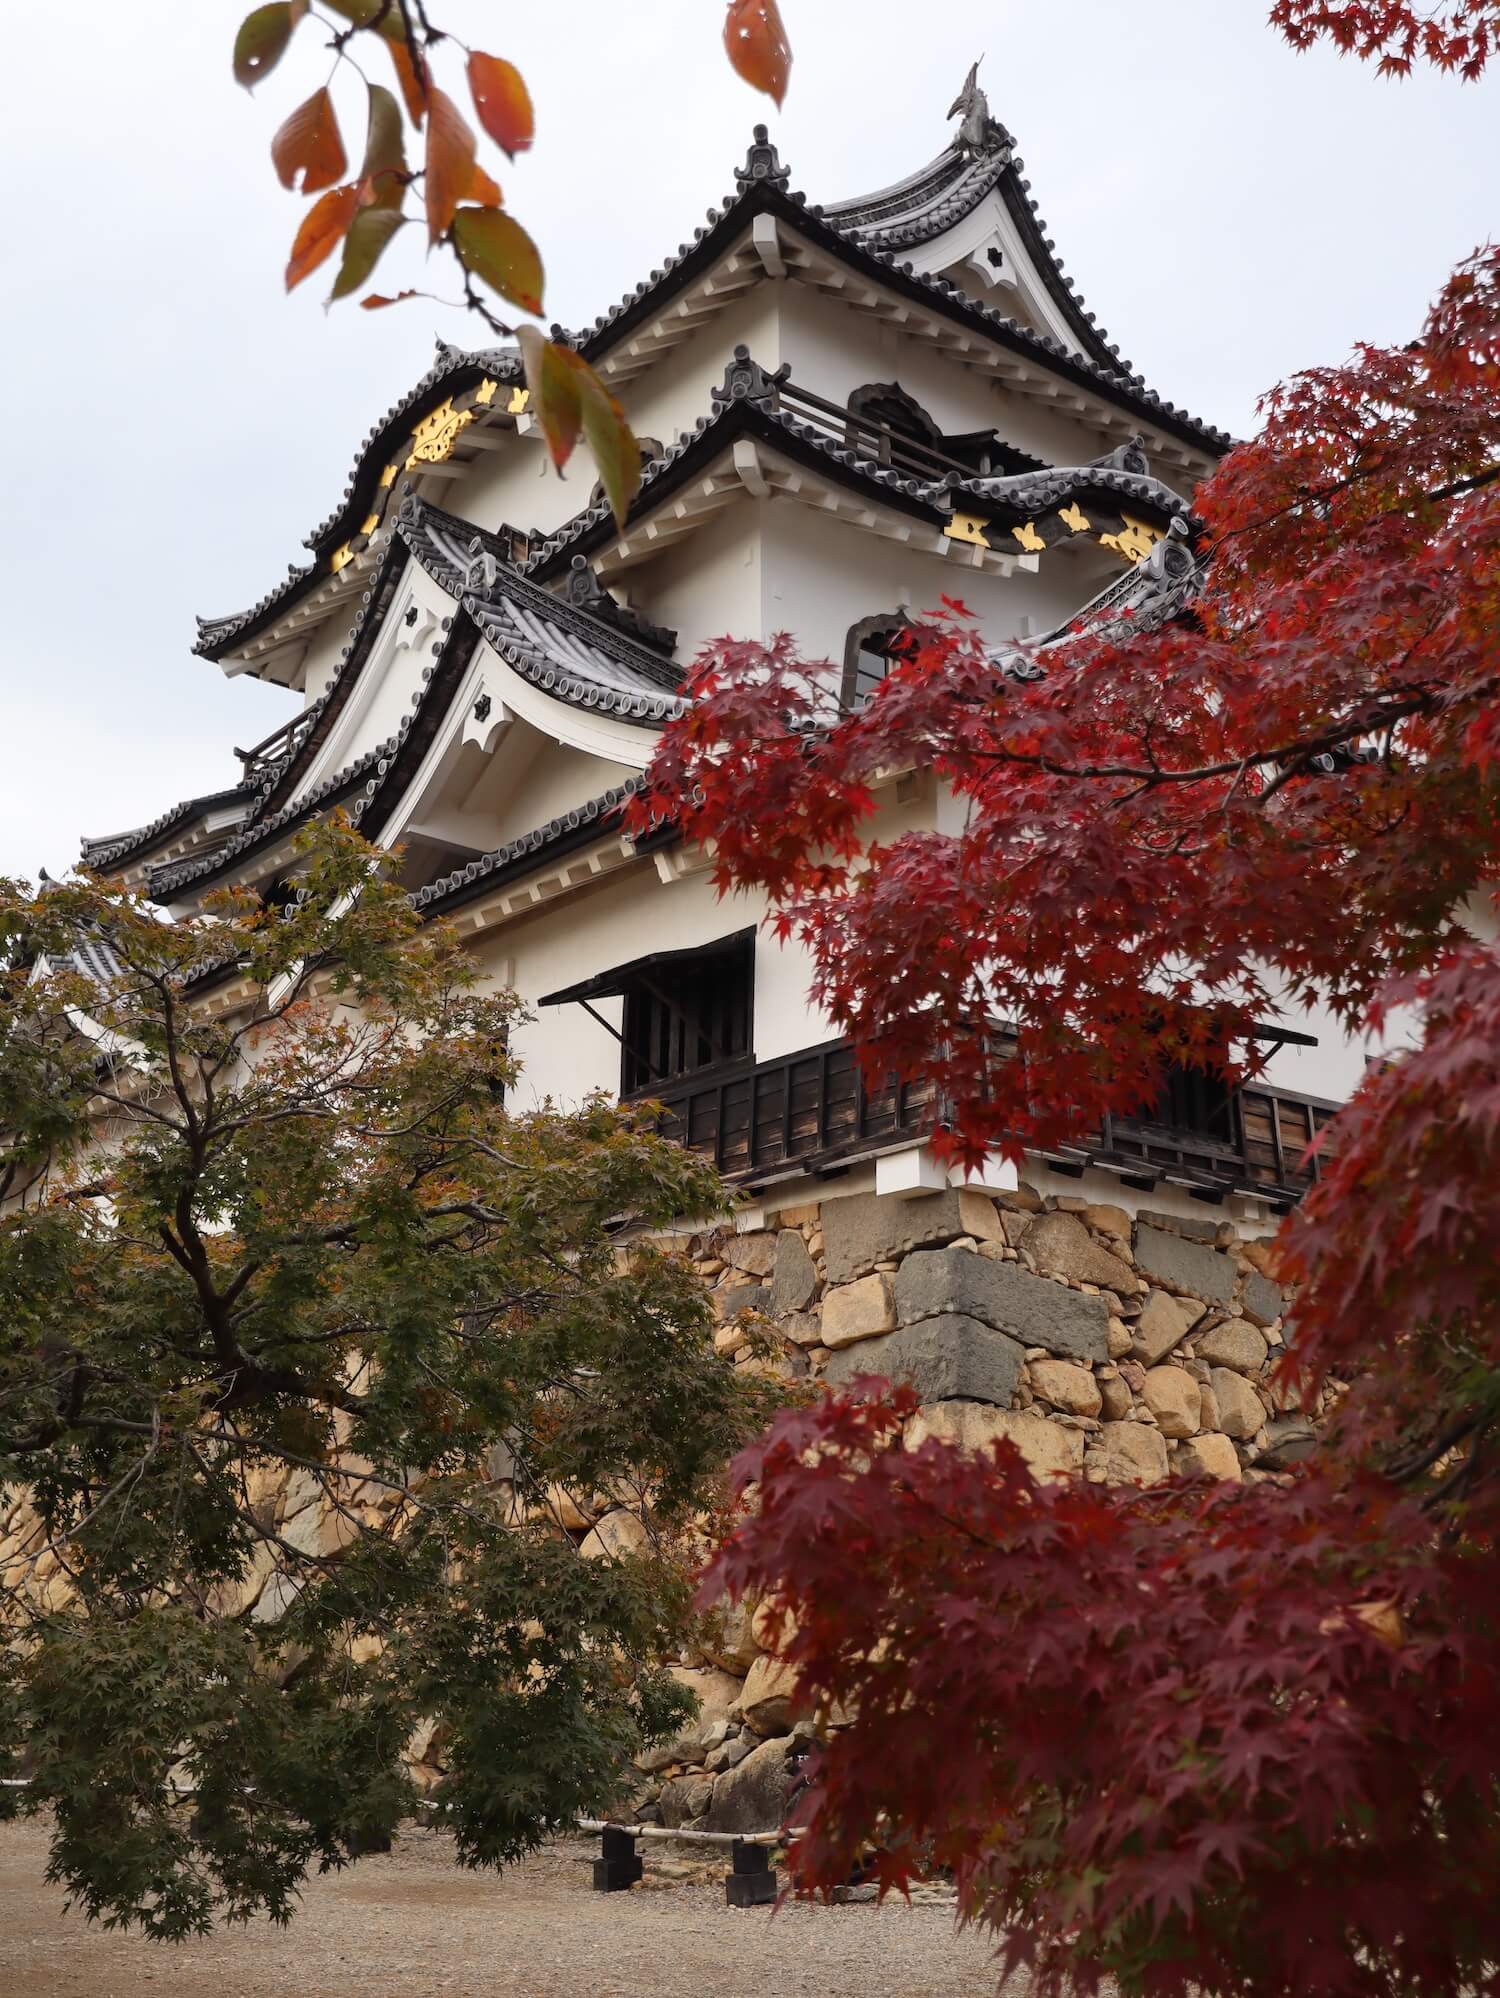 Hikone castle is one of the top reasons to visit Lake Biwa